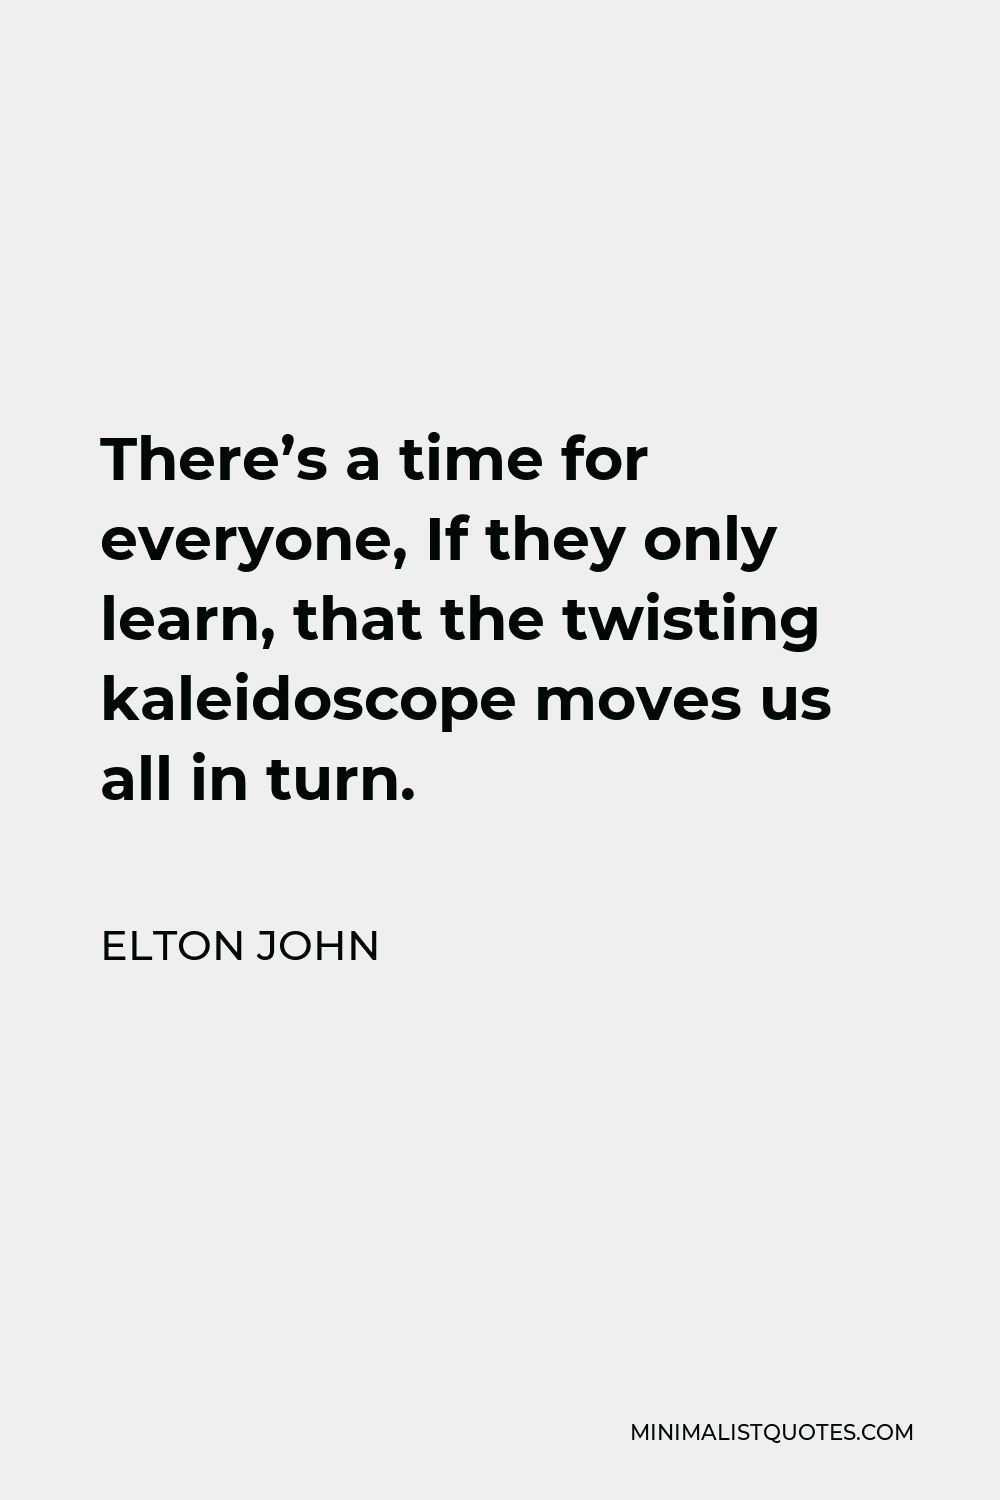 Elton John Quote - There’s a time for everyone, If they only learn, that the twisting kaleidoscope moves us all in turn.